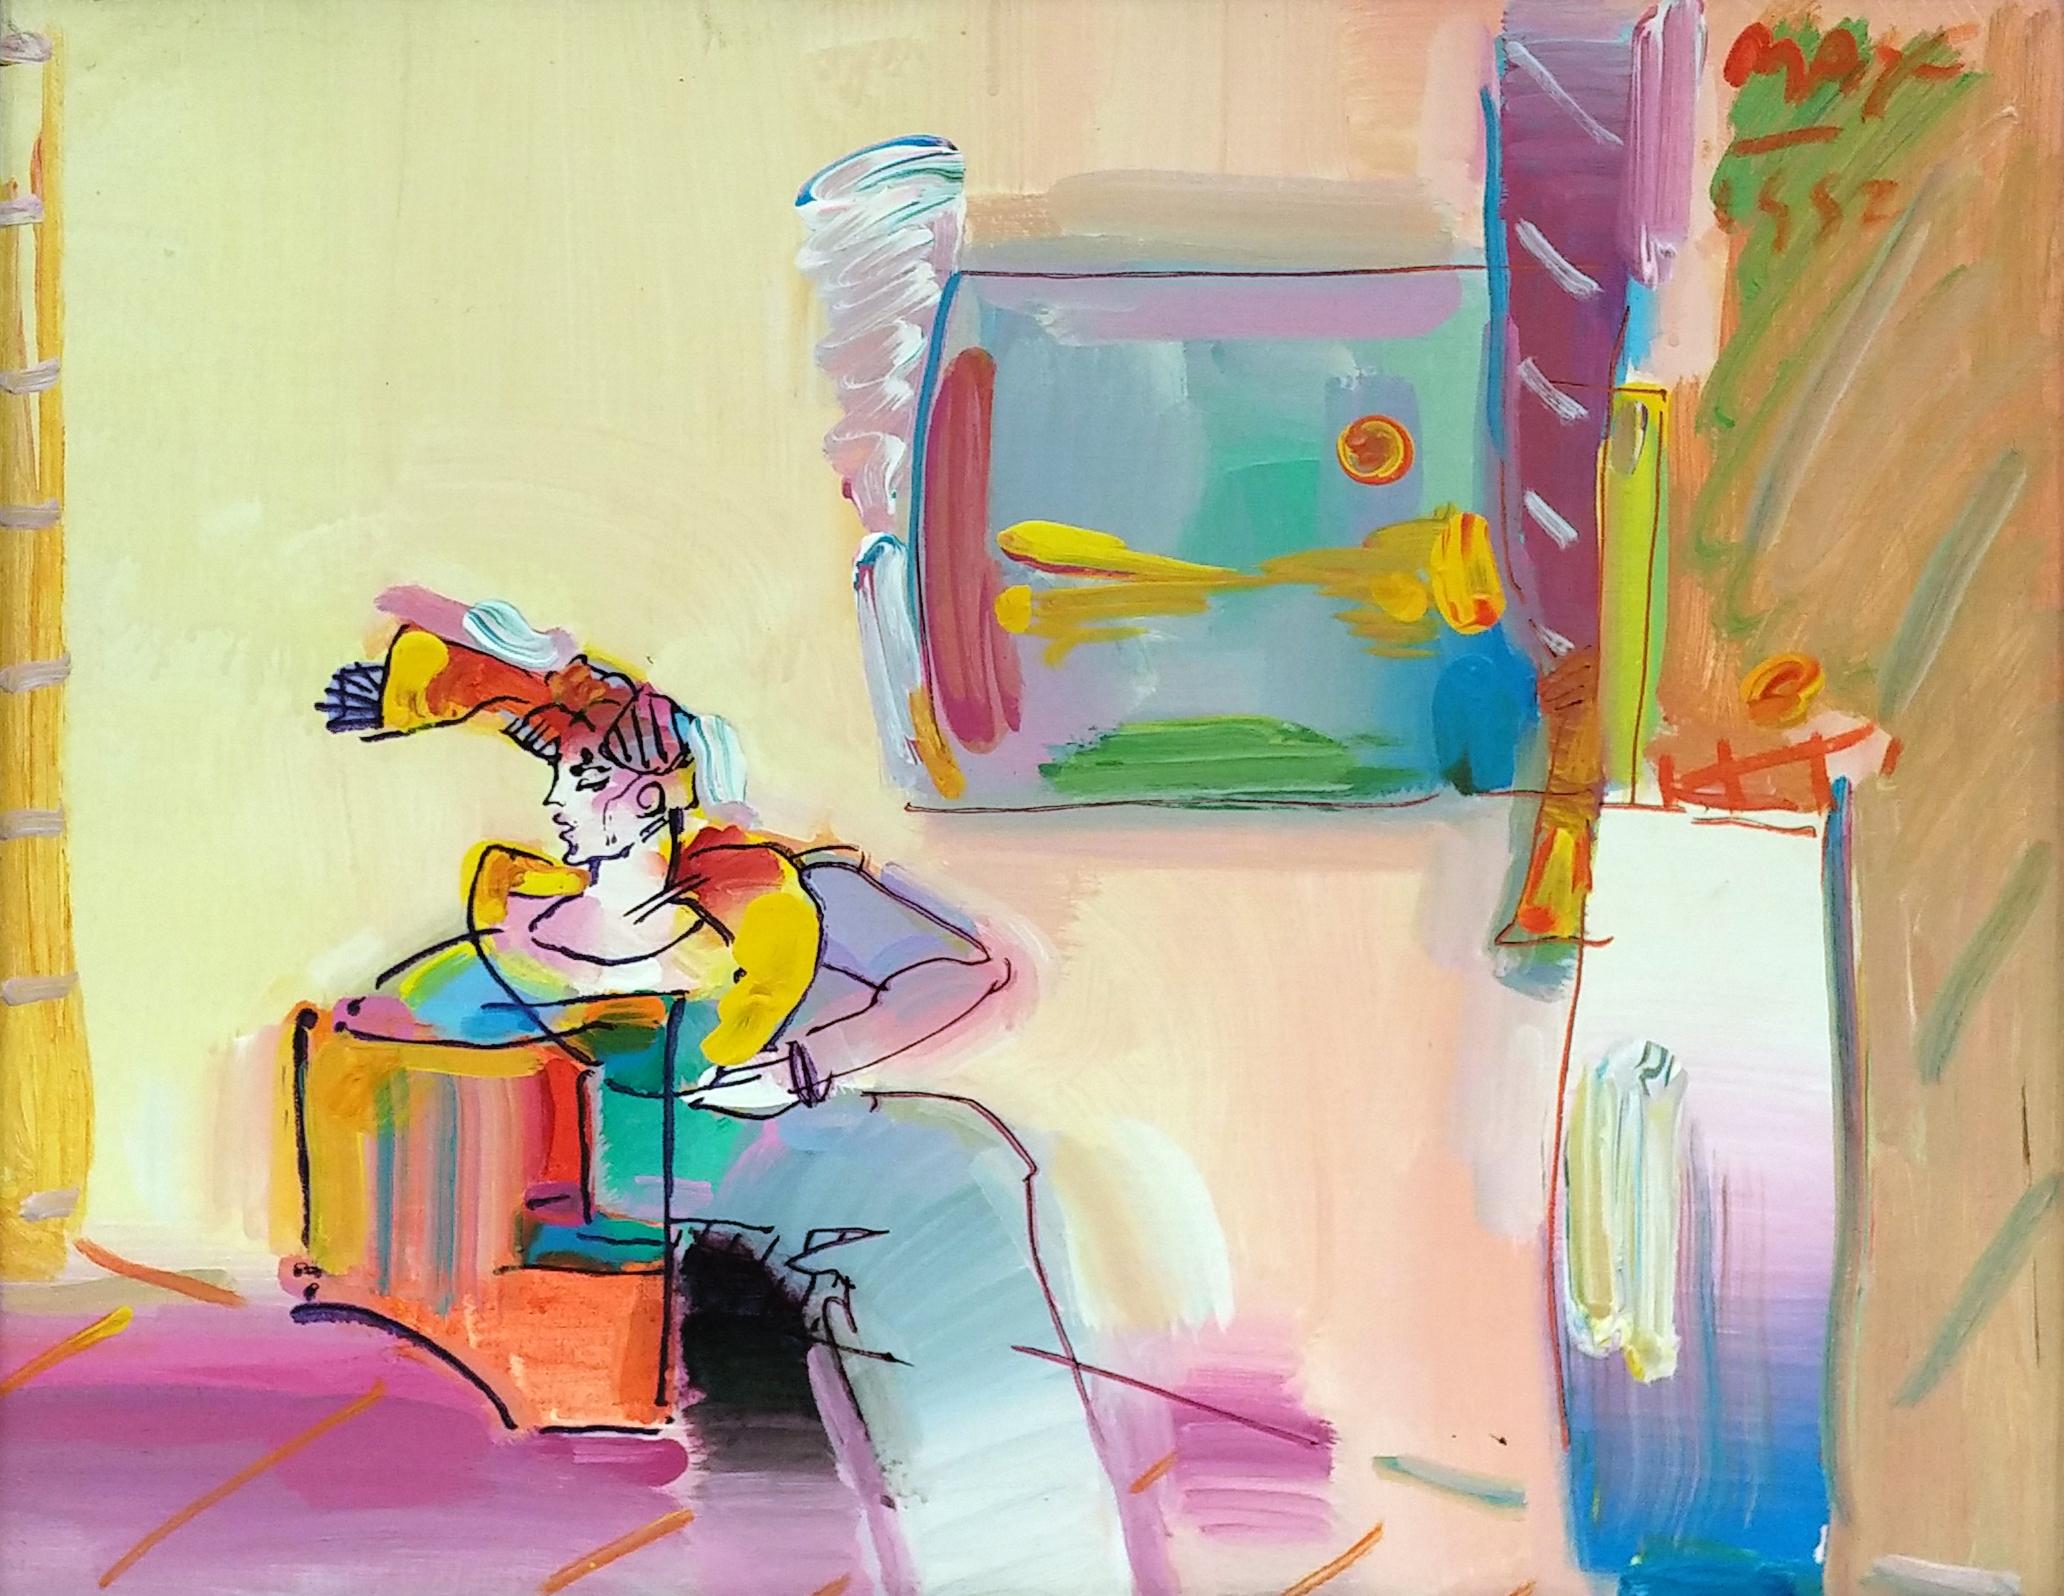 LIVING ROOM (WOMAN) - Painting by Peter Max